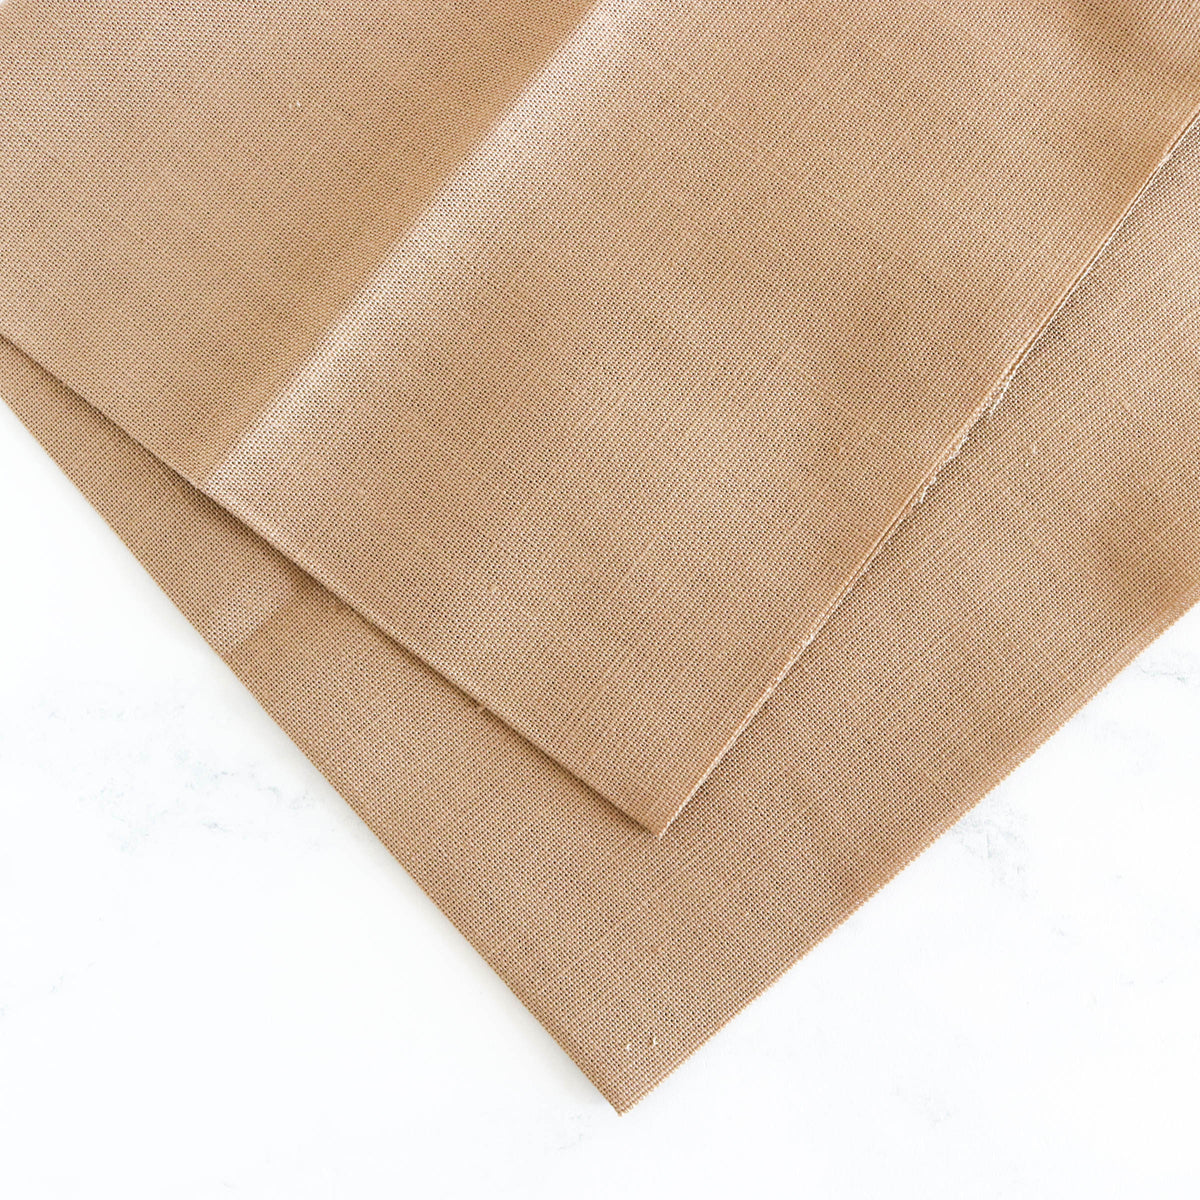 Cotton Hand Embroidery Fabric - Mocha Beige